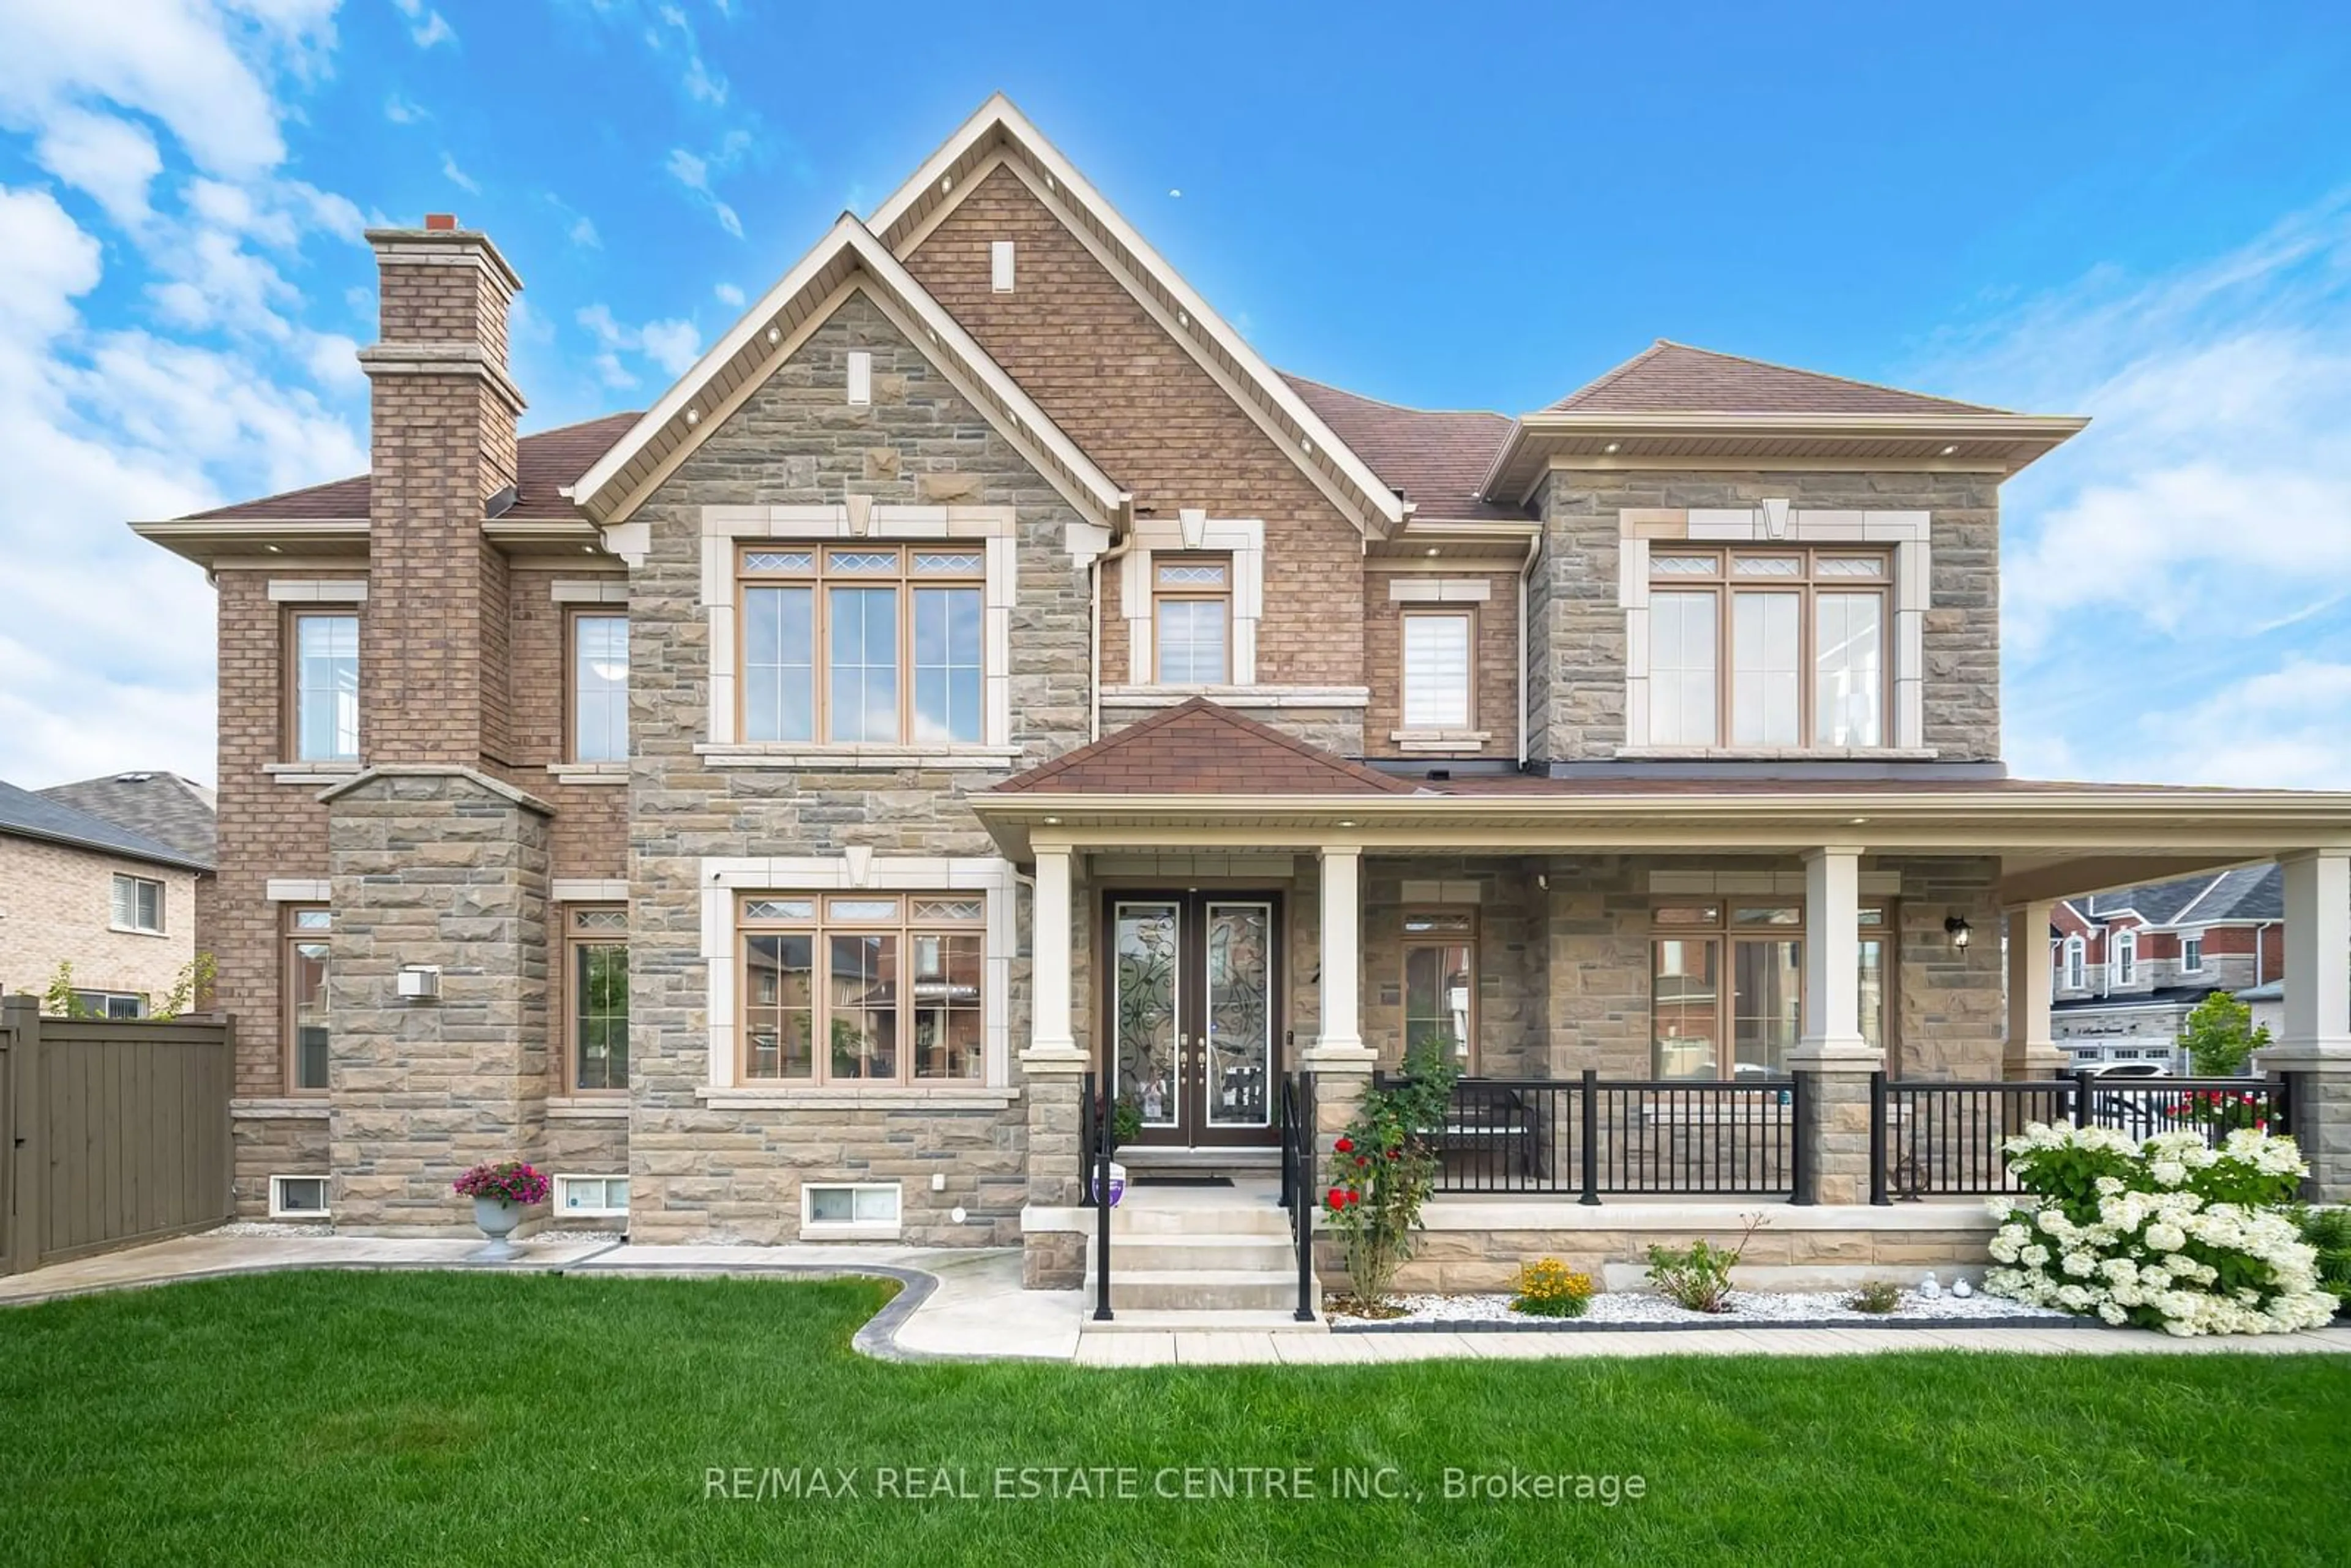 Home with brick exterior material for 72 parity Rd, Brampton Ontario L6X 5N5